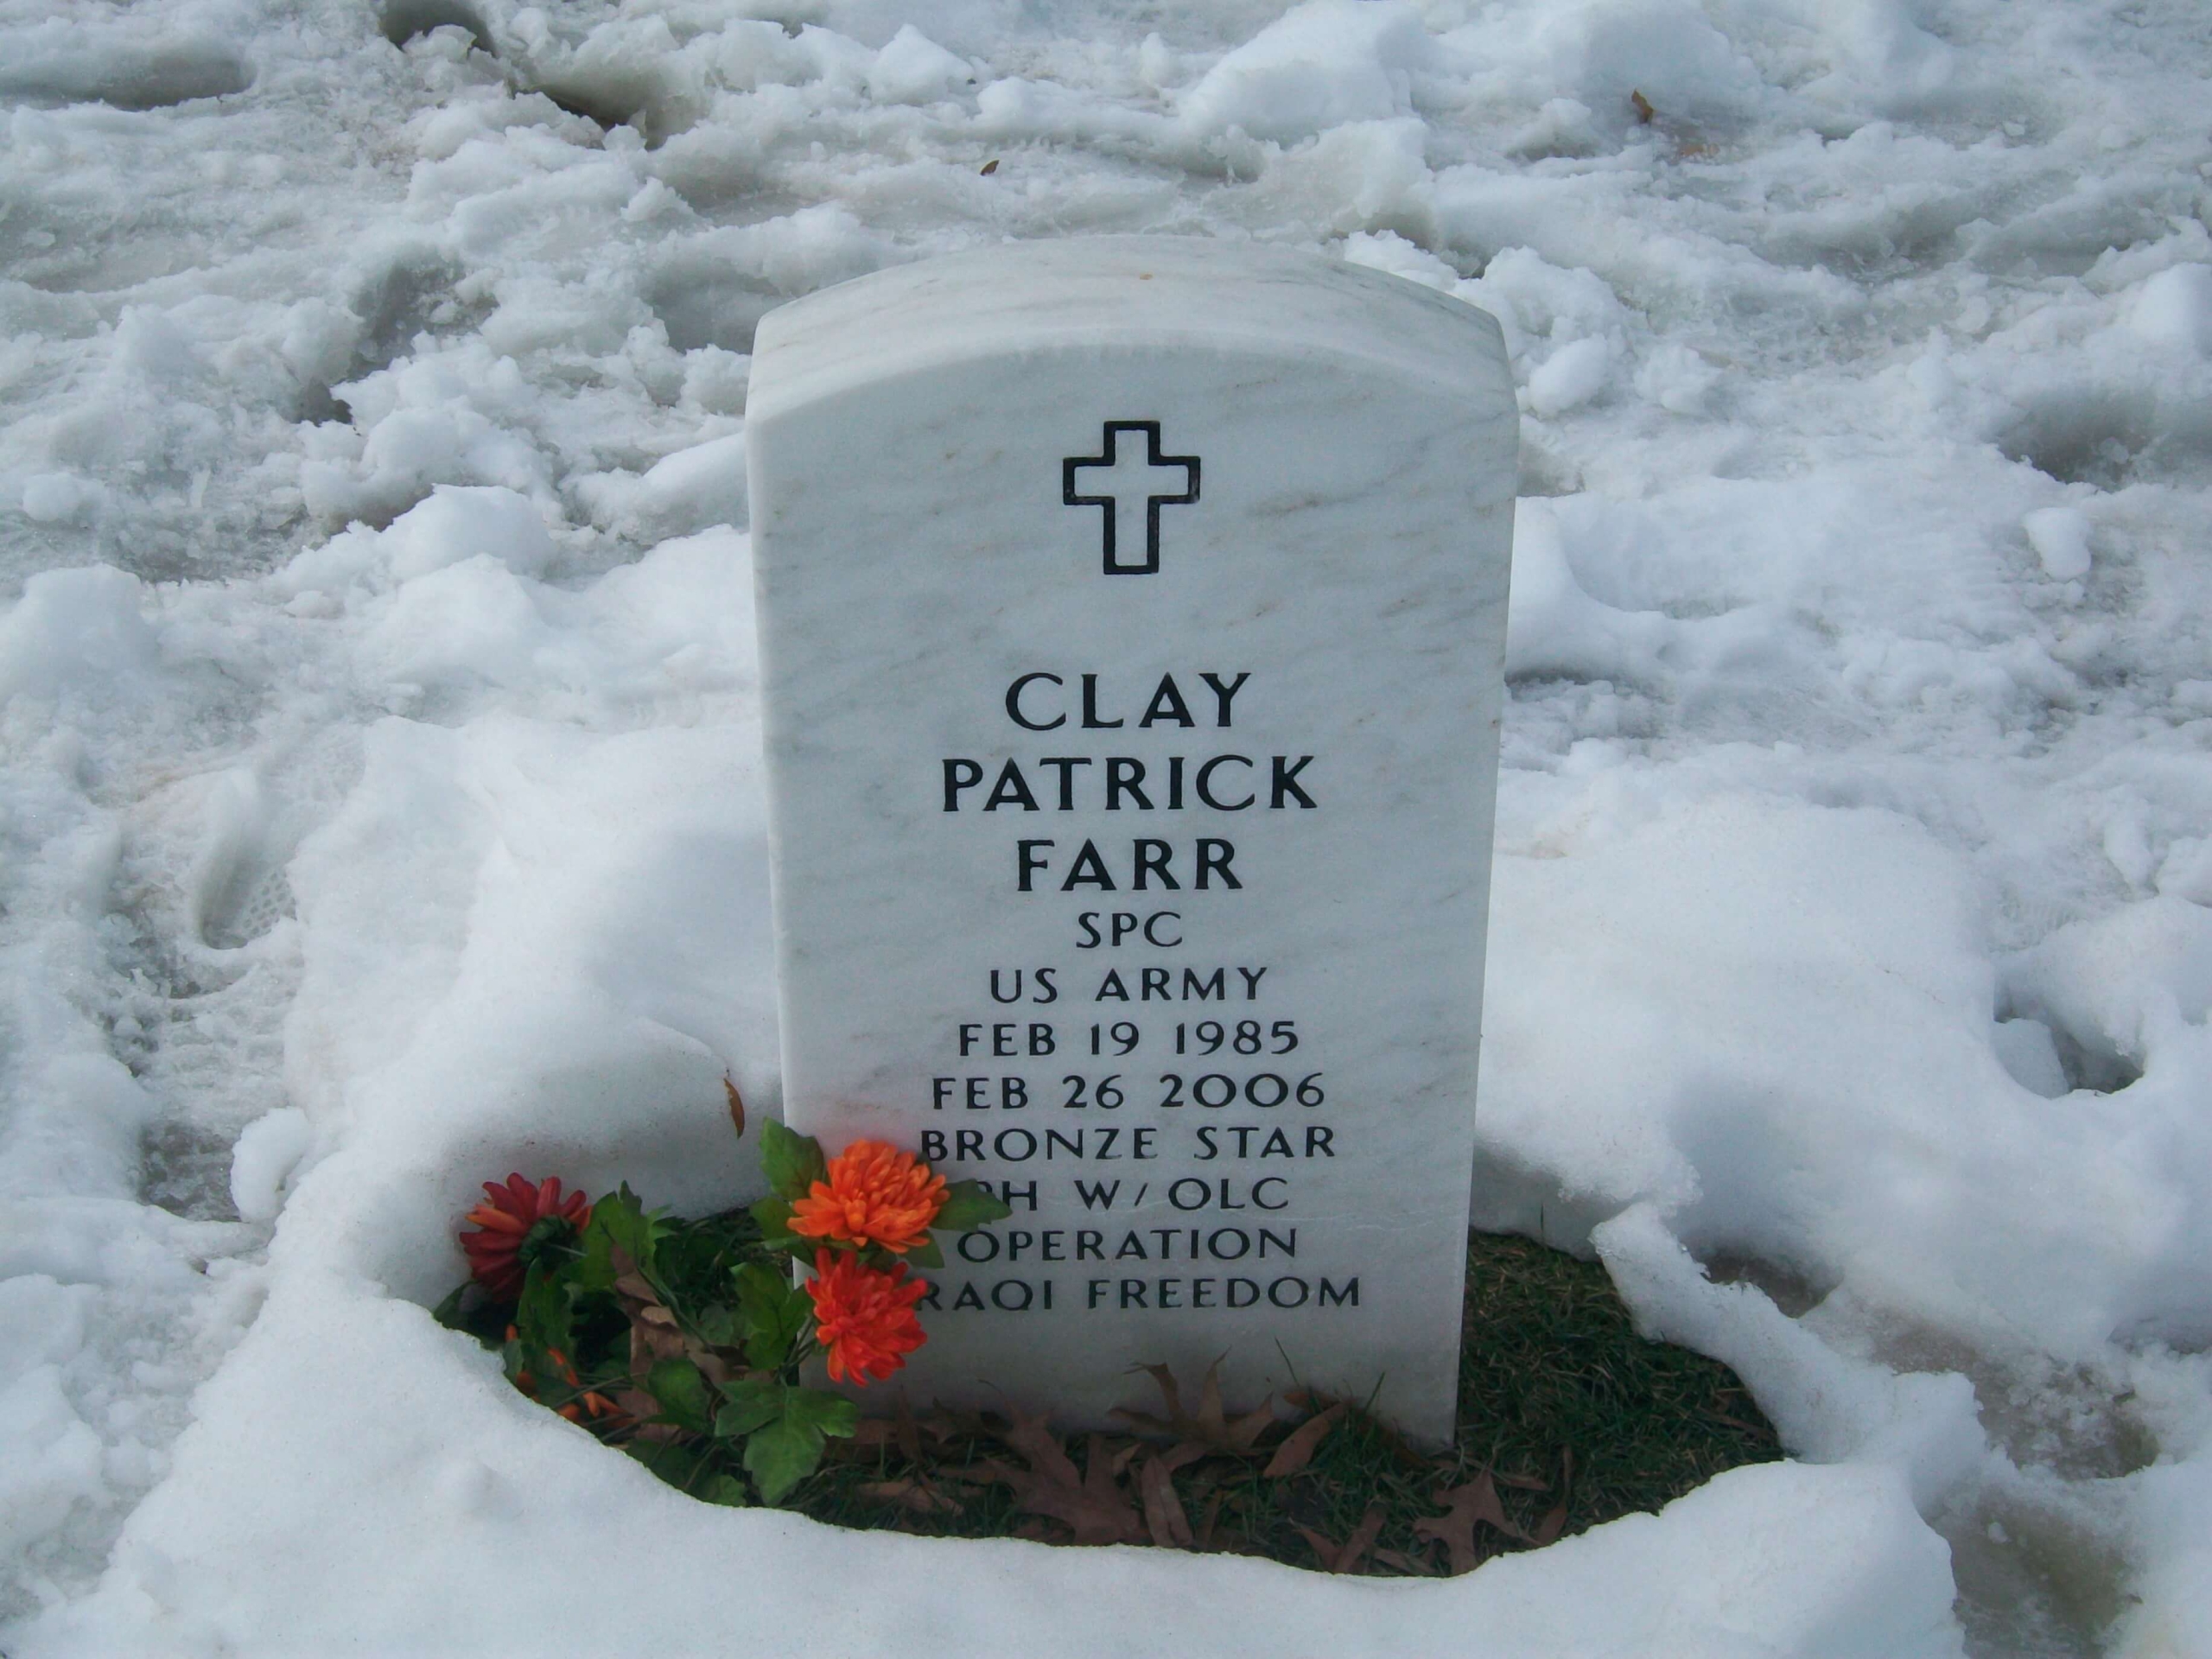 clay-patrick-farr-rose-event-02202010-001